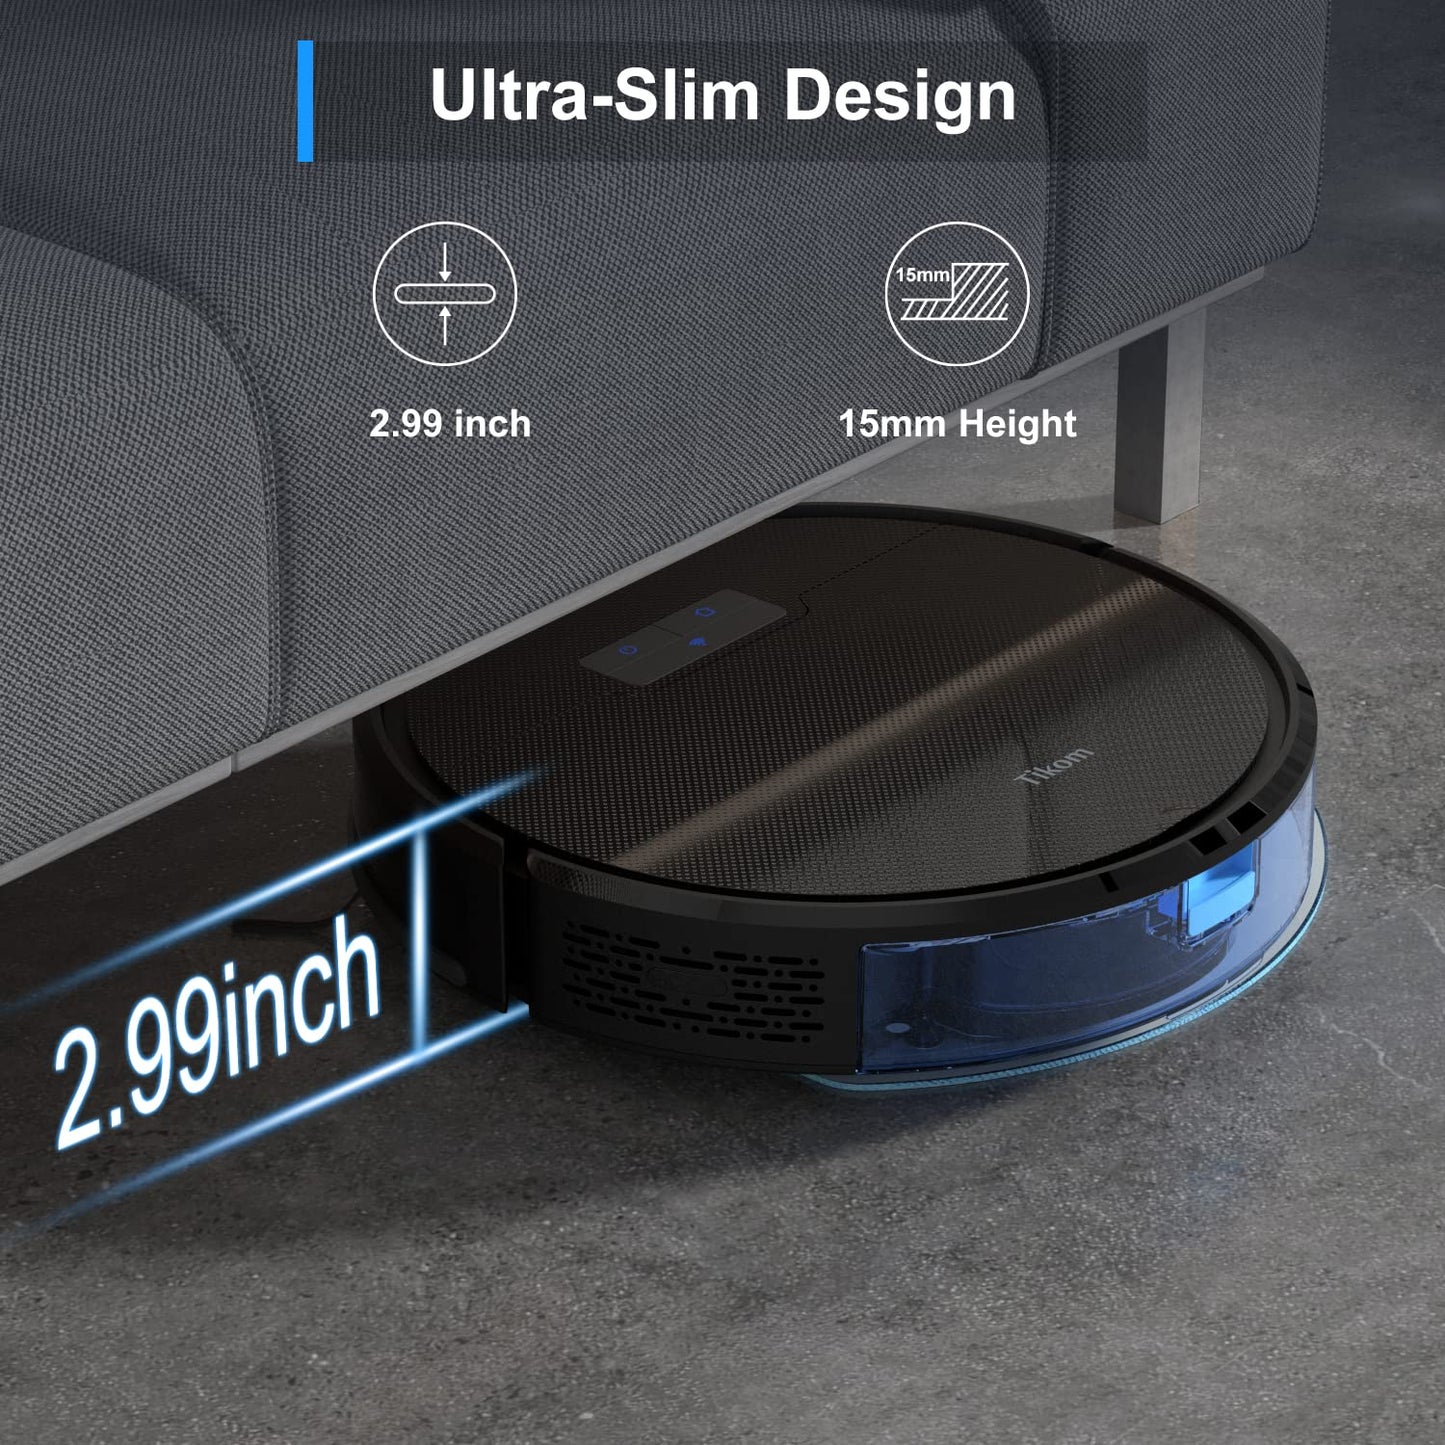 Tikom G8000 Pro Robot Vacuum and Mop Combo, 4500Pa Suction, 150Mins Max, Robotic Vacuum Cleaner with Self-Charging,